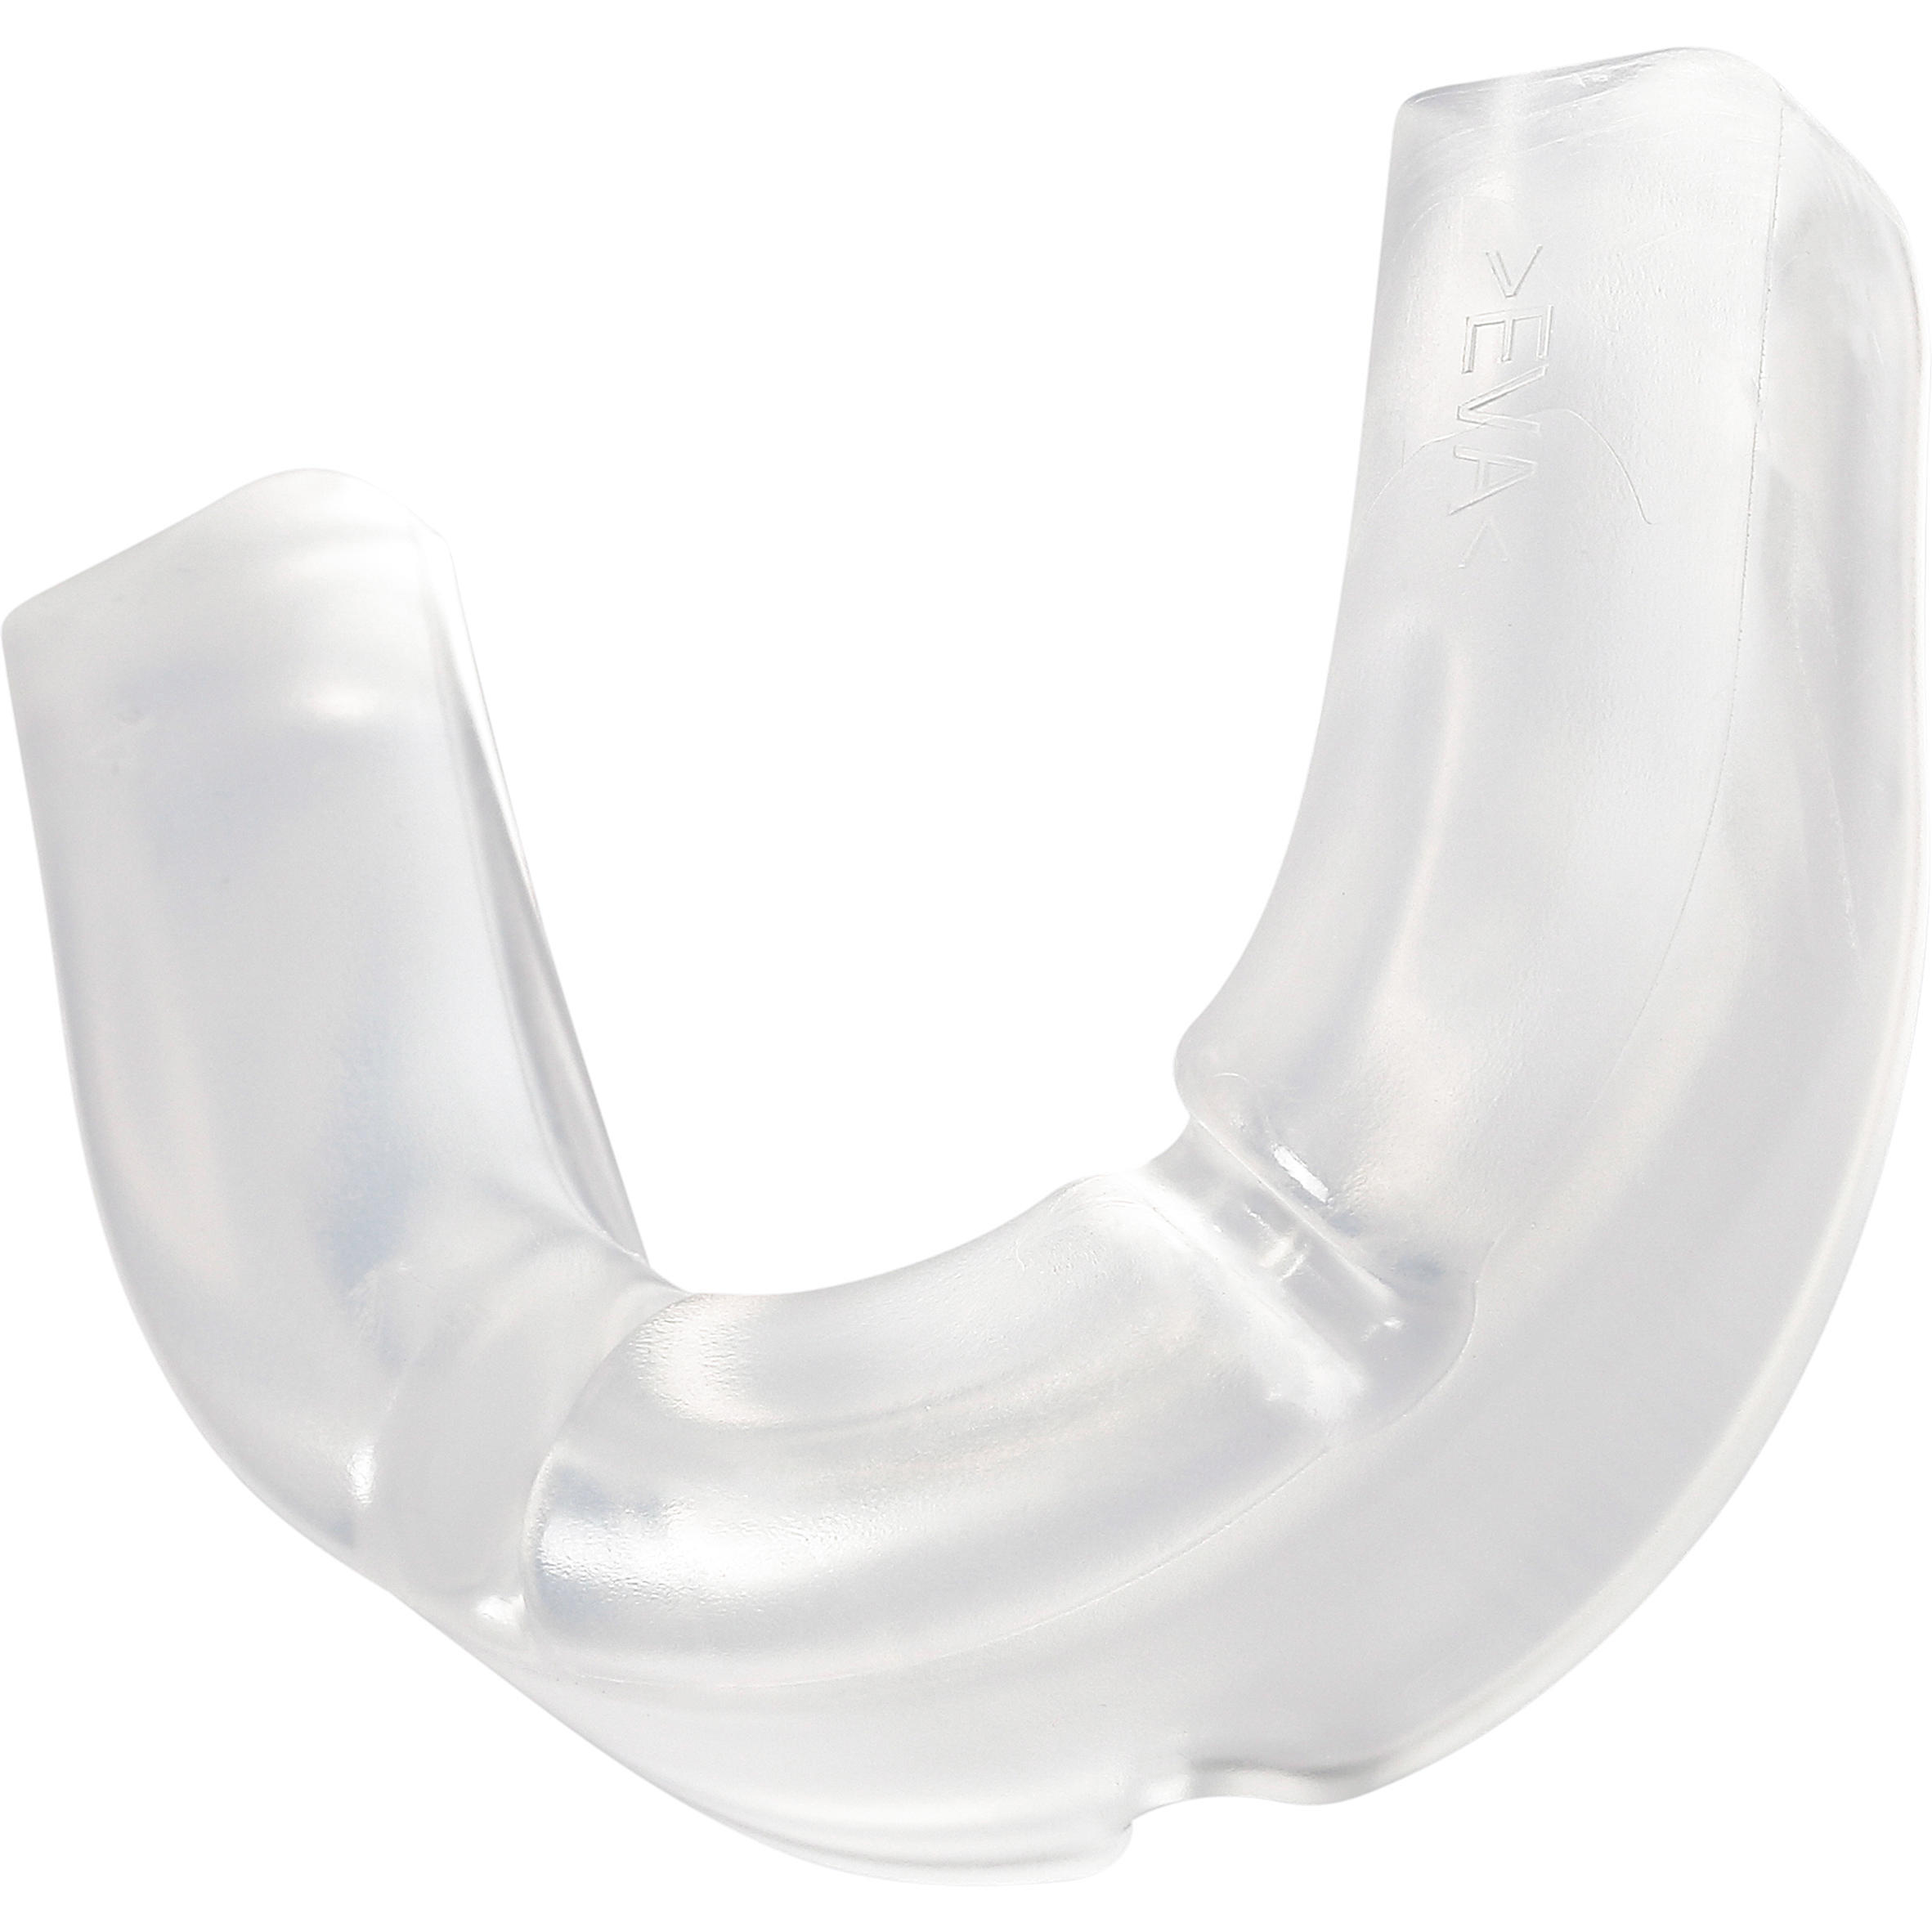 Refurbished Rugby Mouthguard R100 - A Grade 3/7